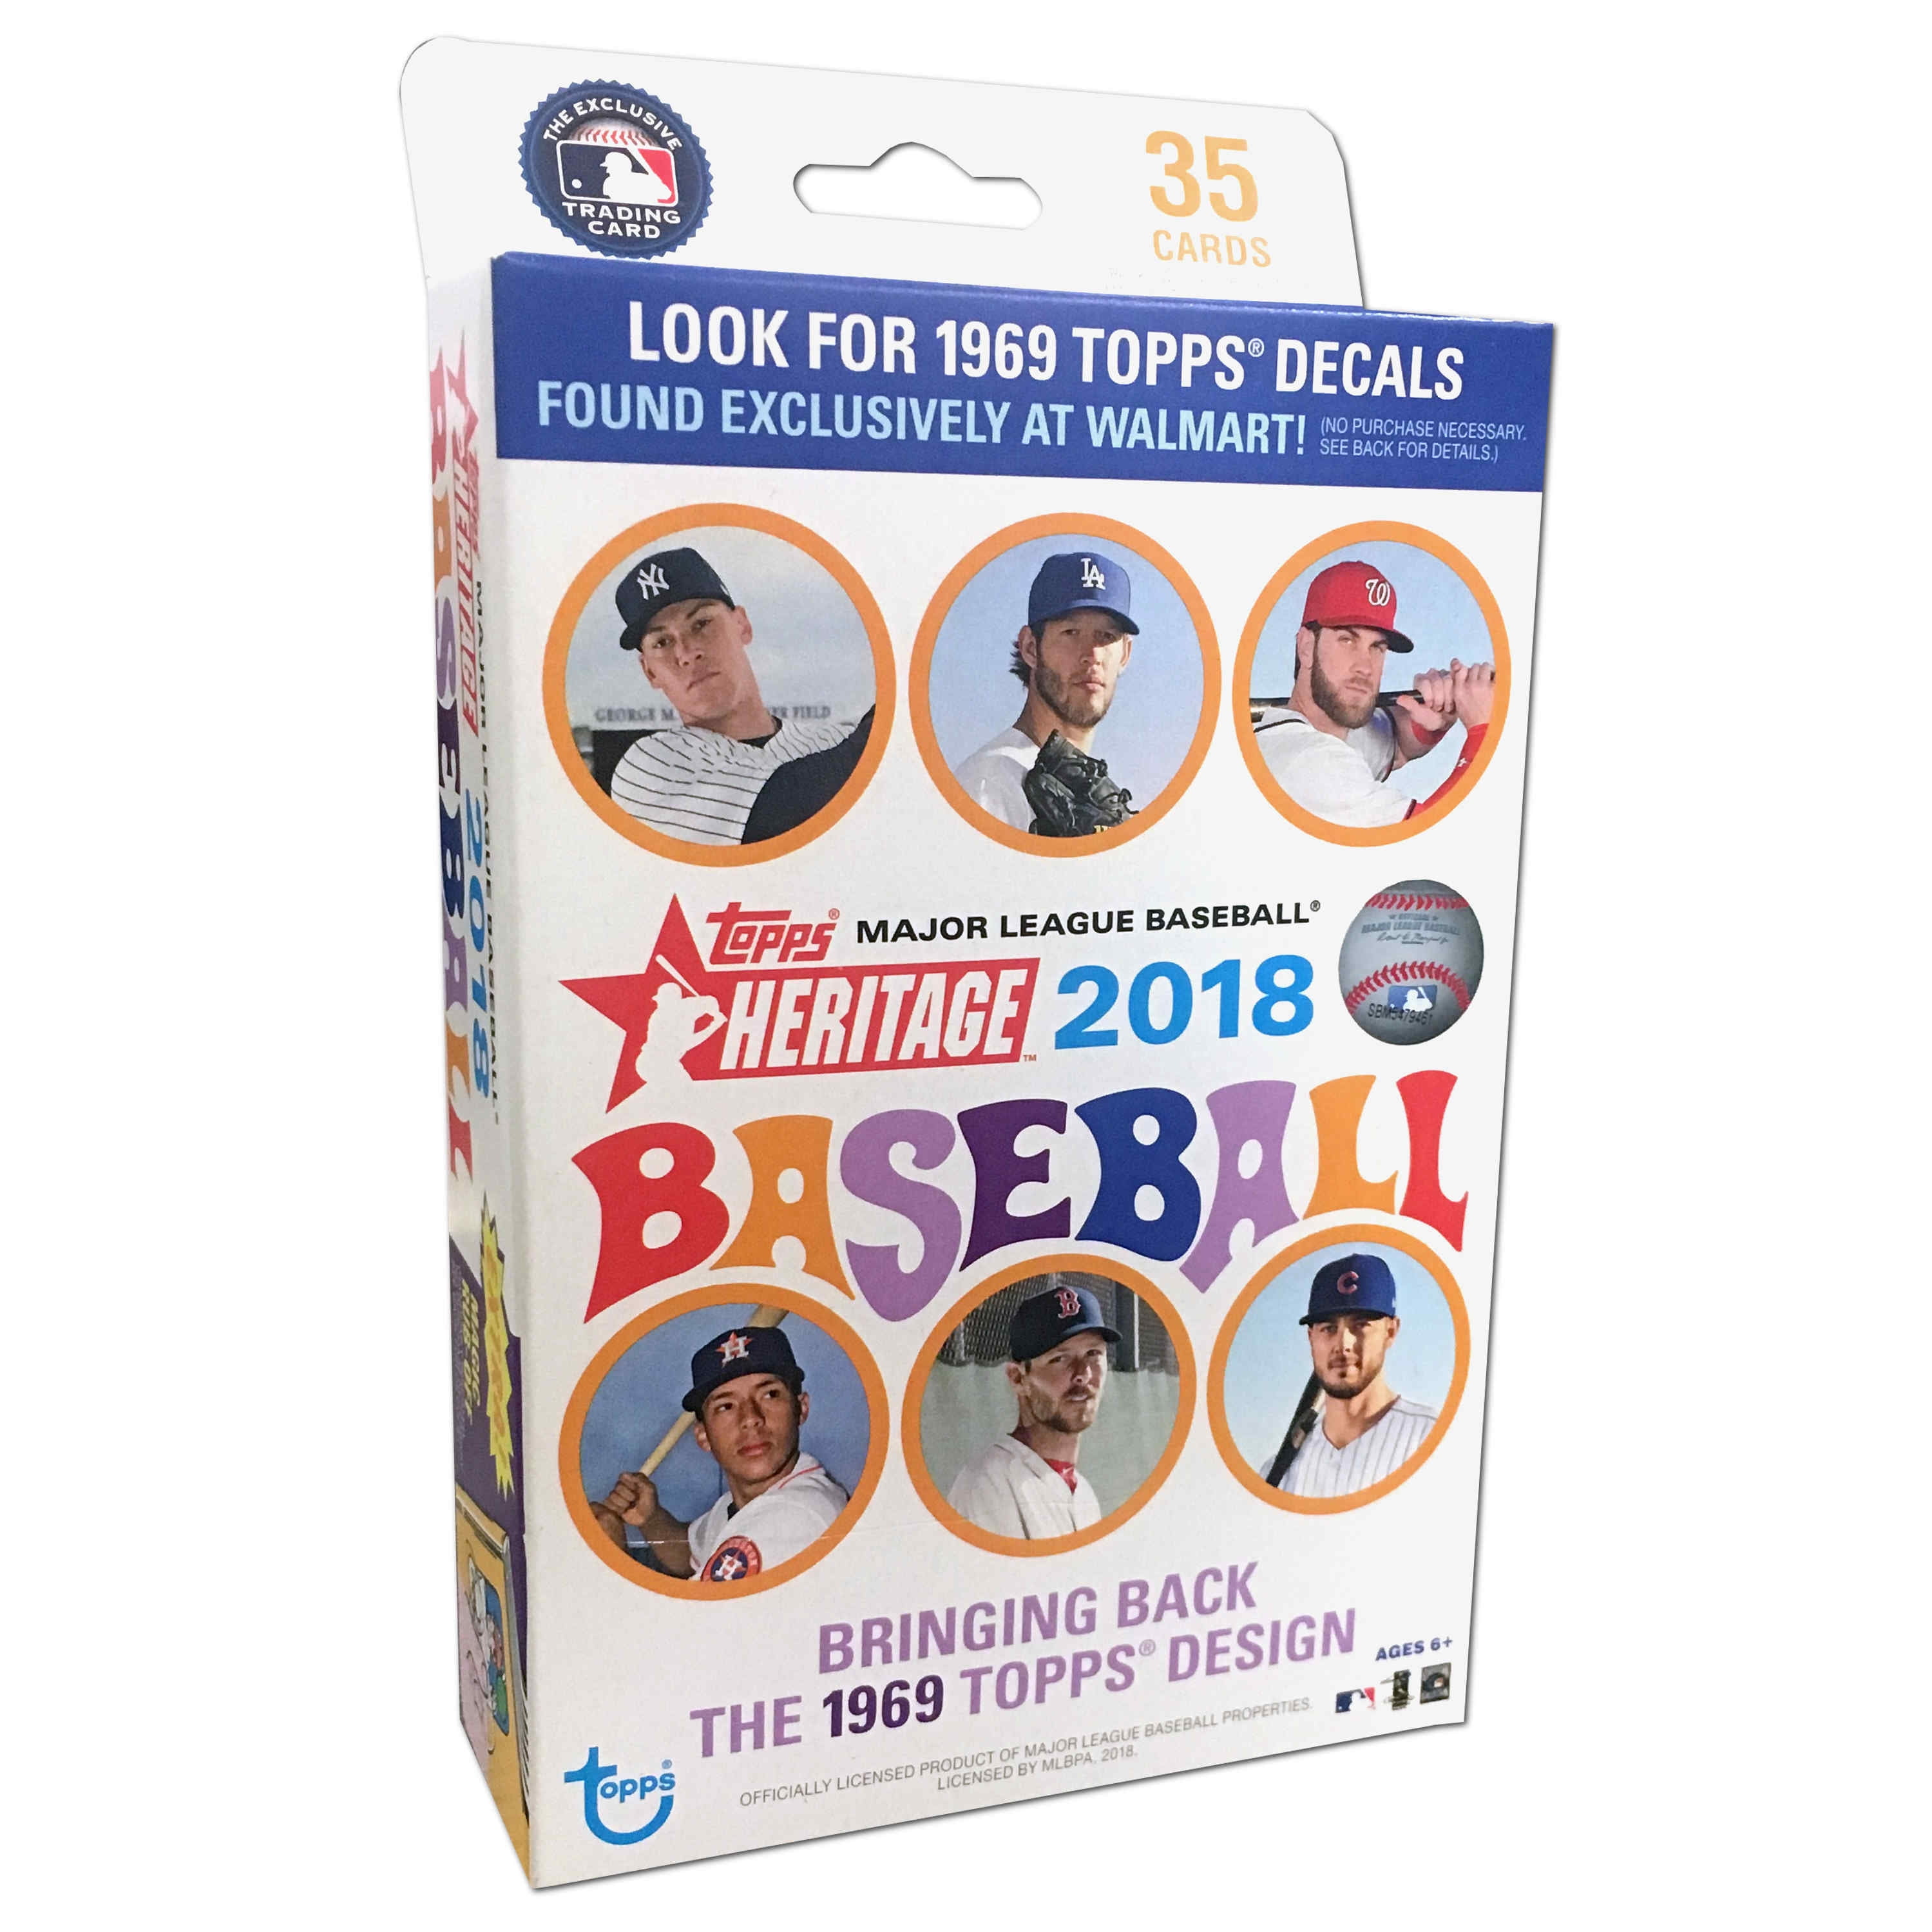 2018 Topps MLB Baseball Heritage Hanger Box Trading Cards | Featuring  Shohei Ohtani's Premiere| 1969 Design | Exclusive Decals only found in this  box